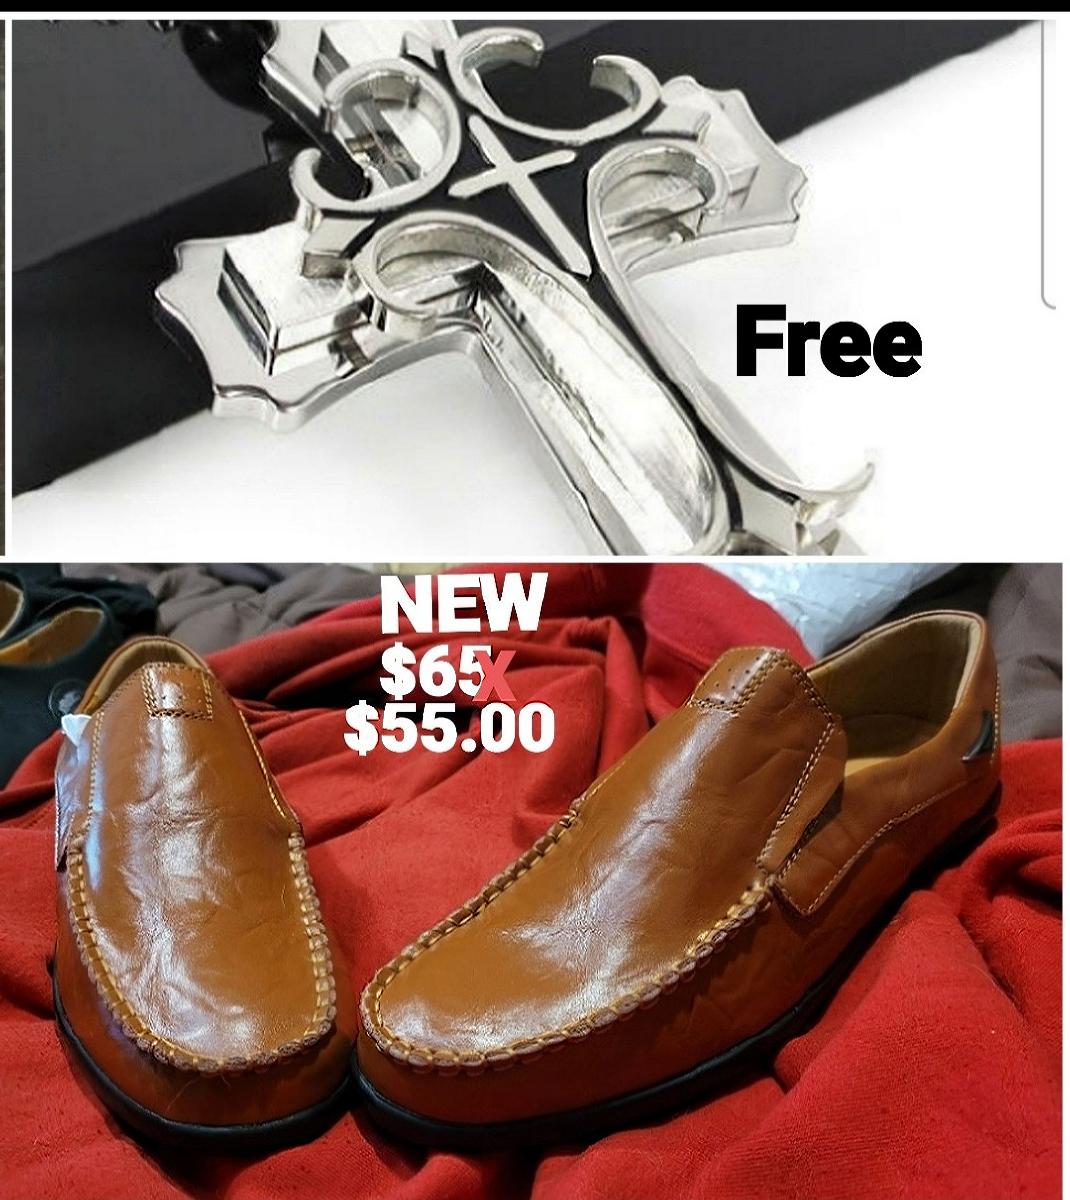 NEW: "Fashion" Men's Leather Loafers Casual Driving Shoe,